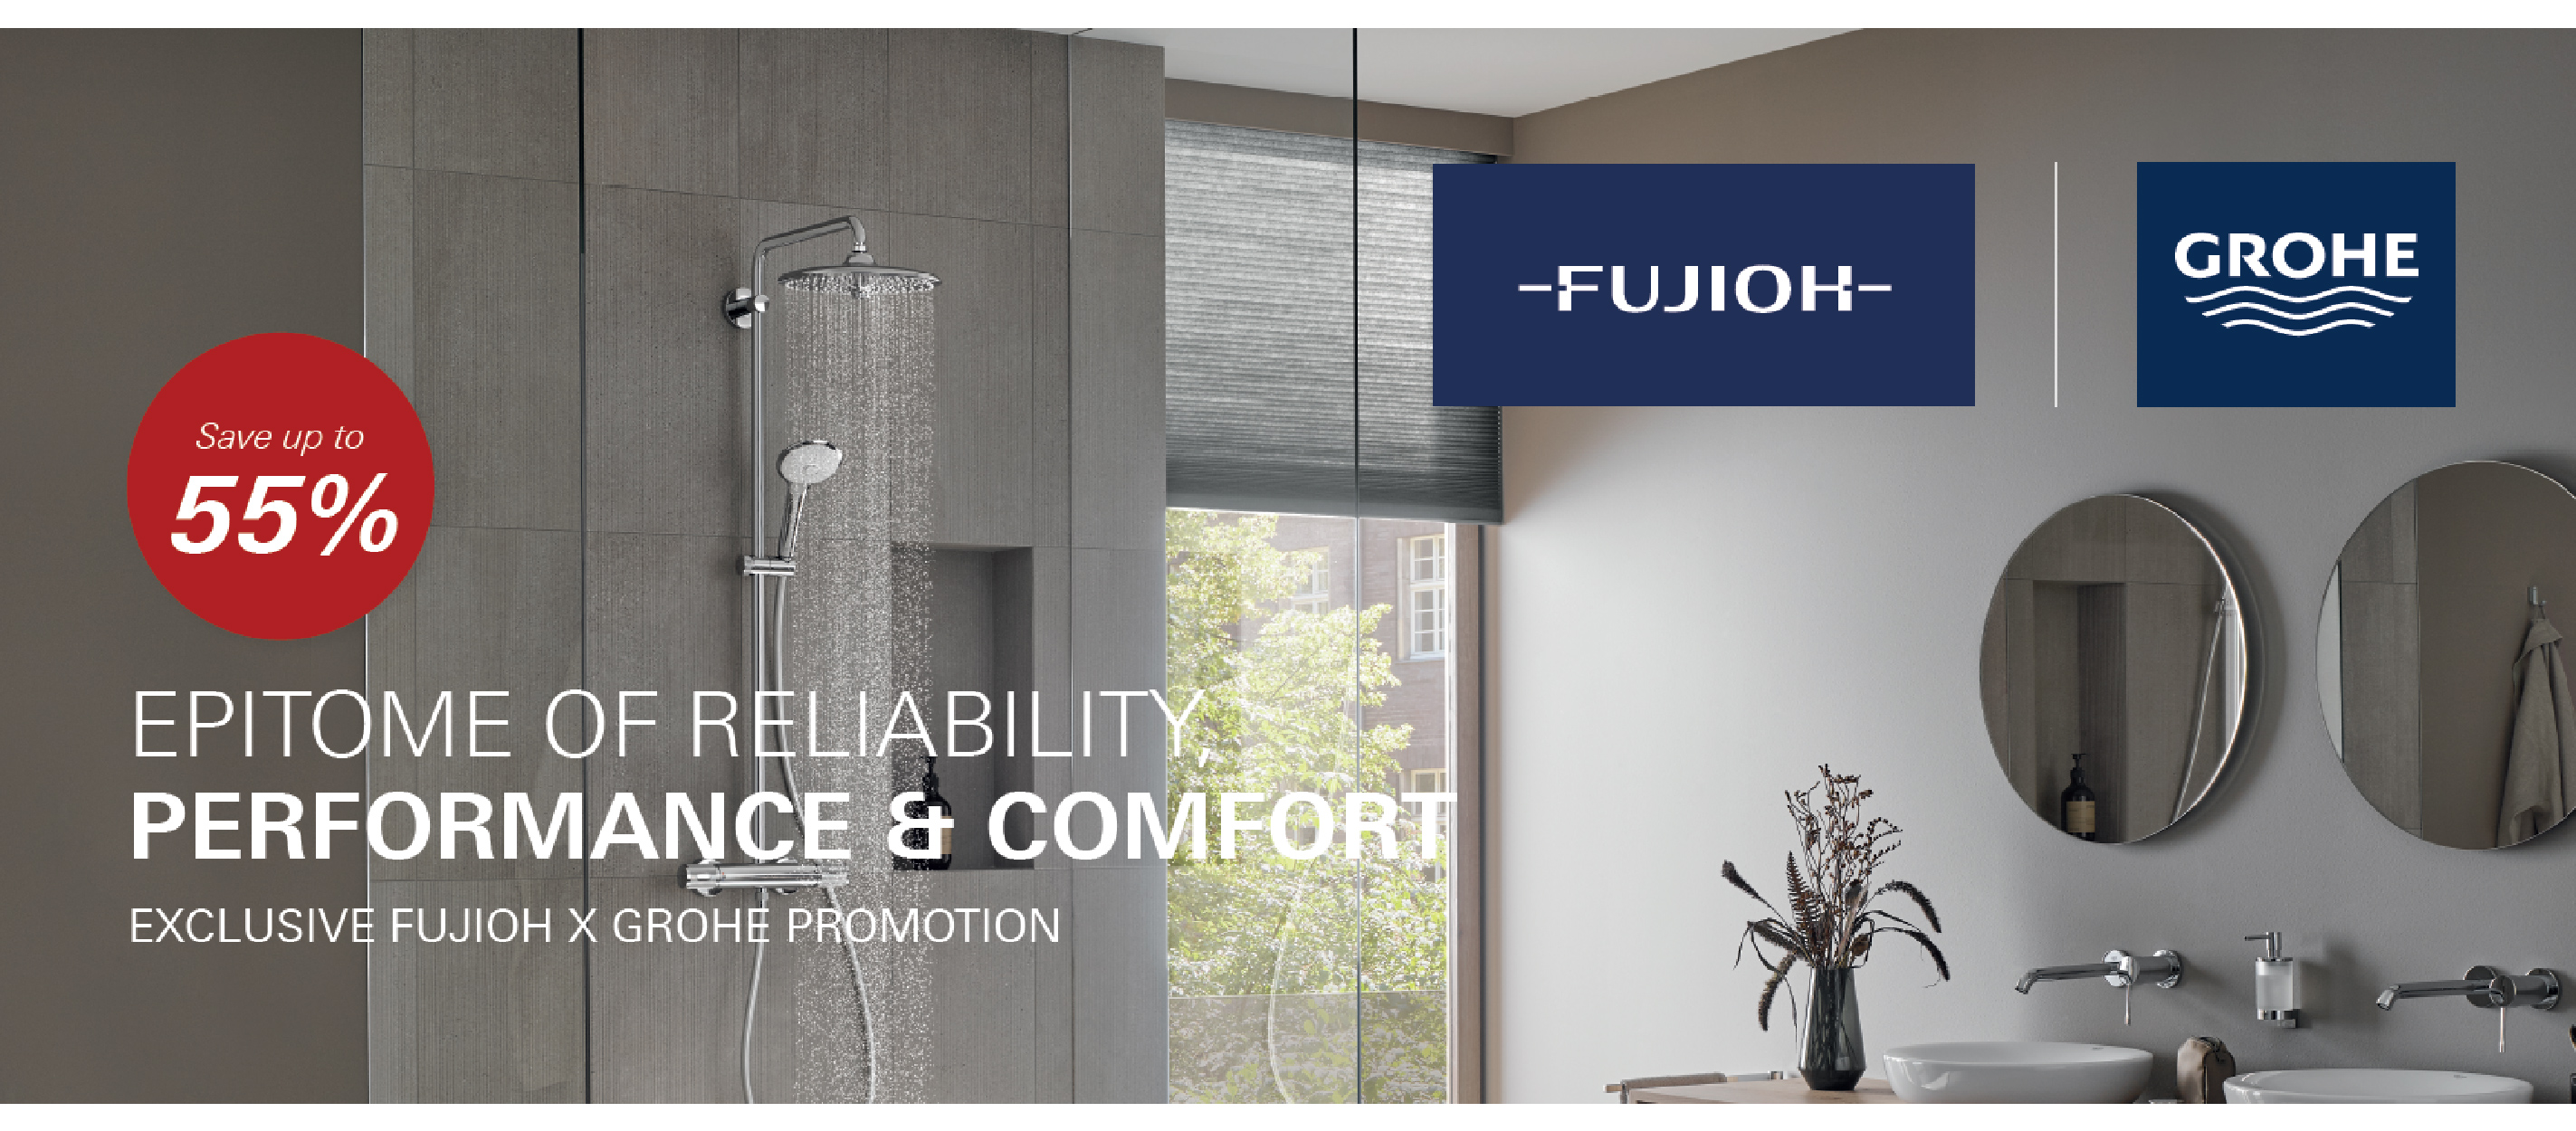 EXCLUSIVE FUJIOH X GROHE PROMOTION